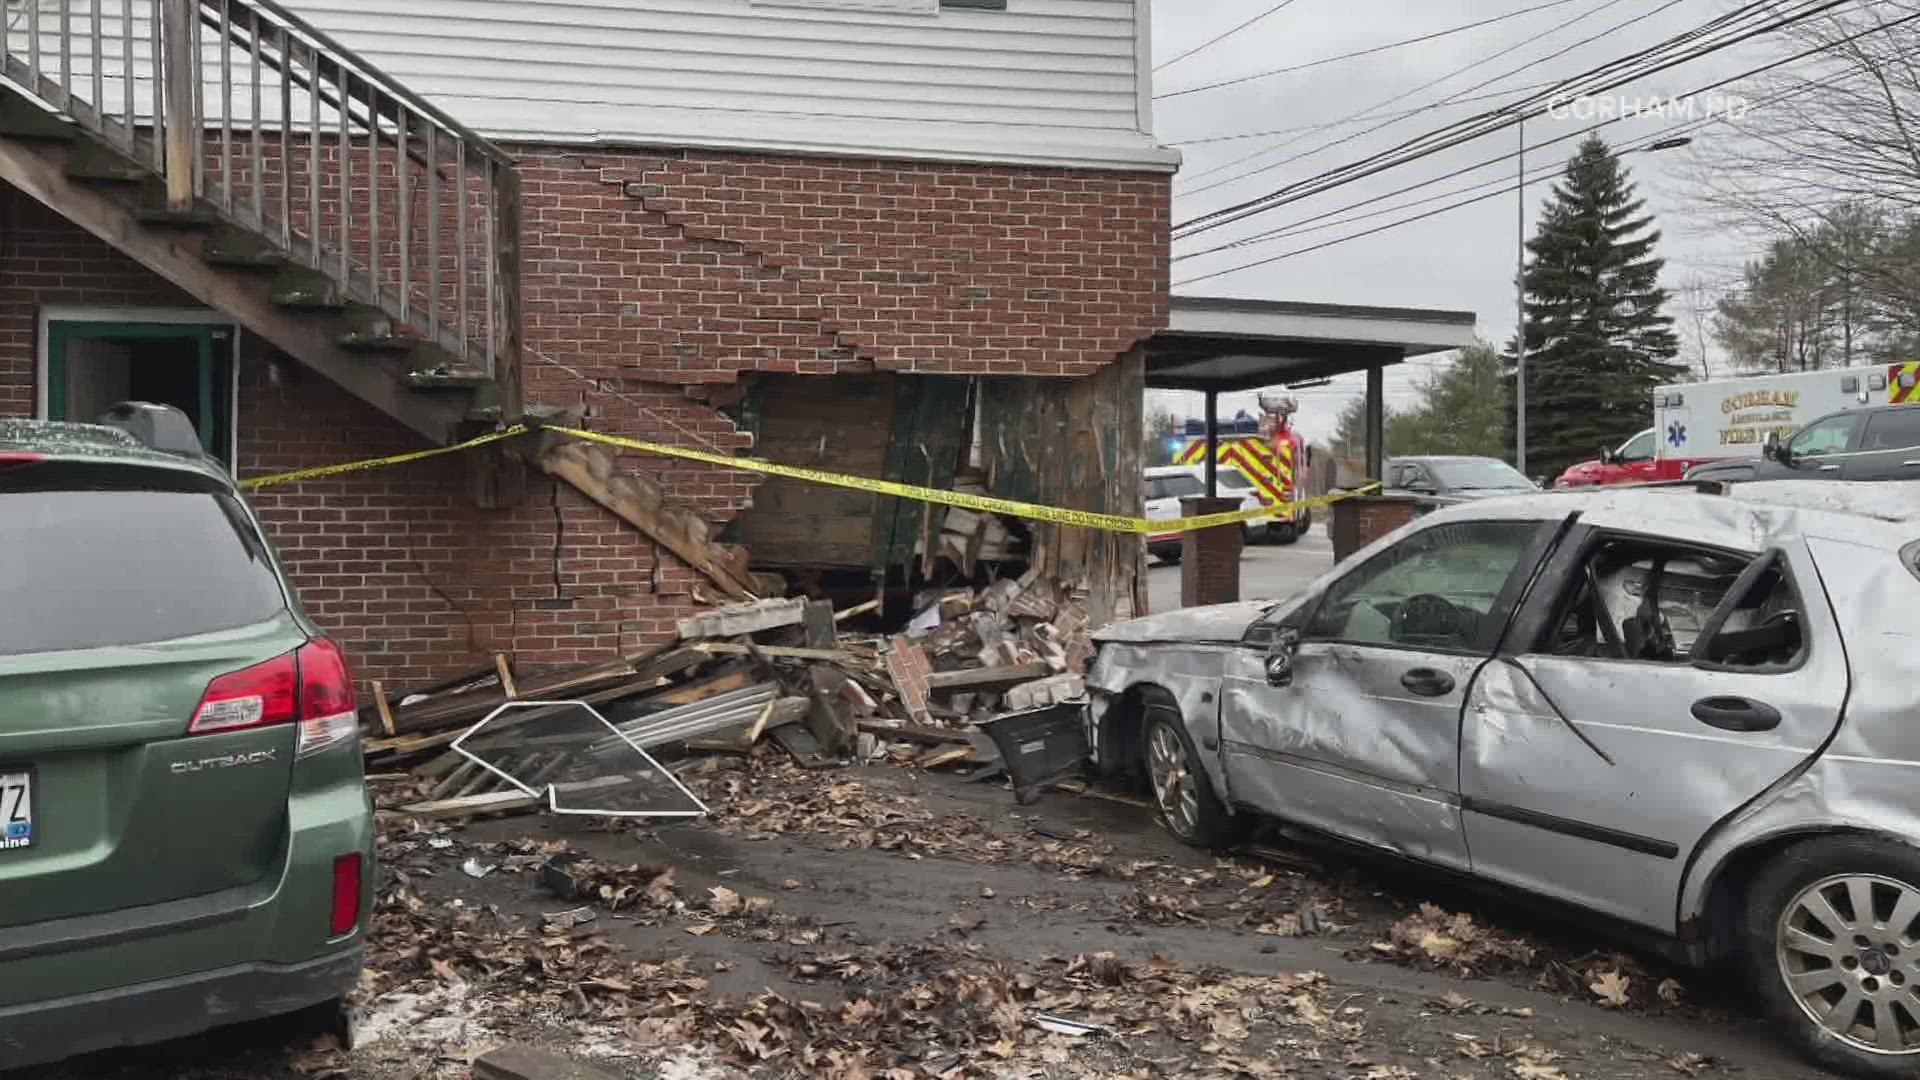 The driver and an apartment occupant reportedly suffered non-life-threatening injuries, a release said Wednesday.